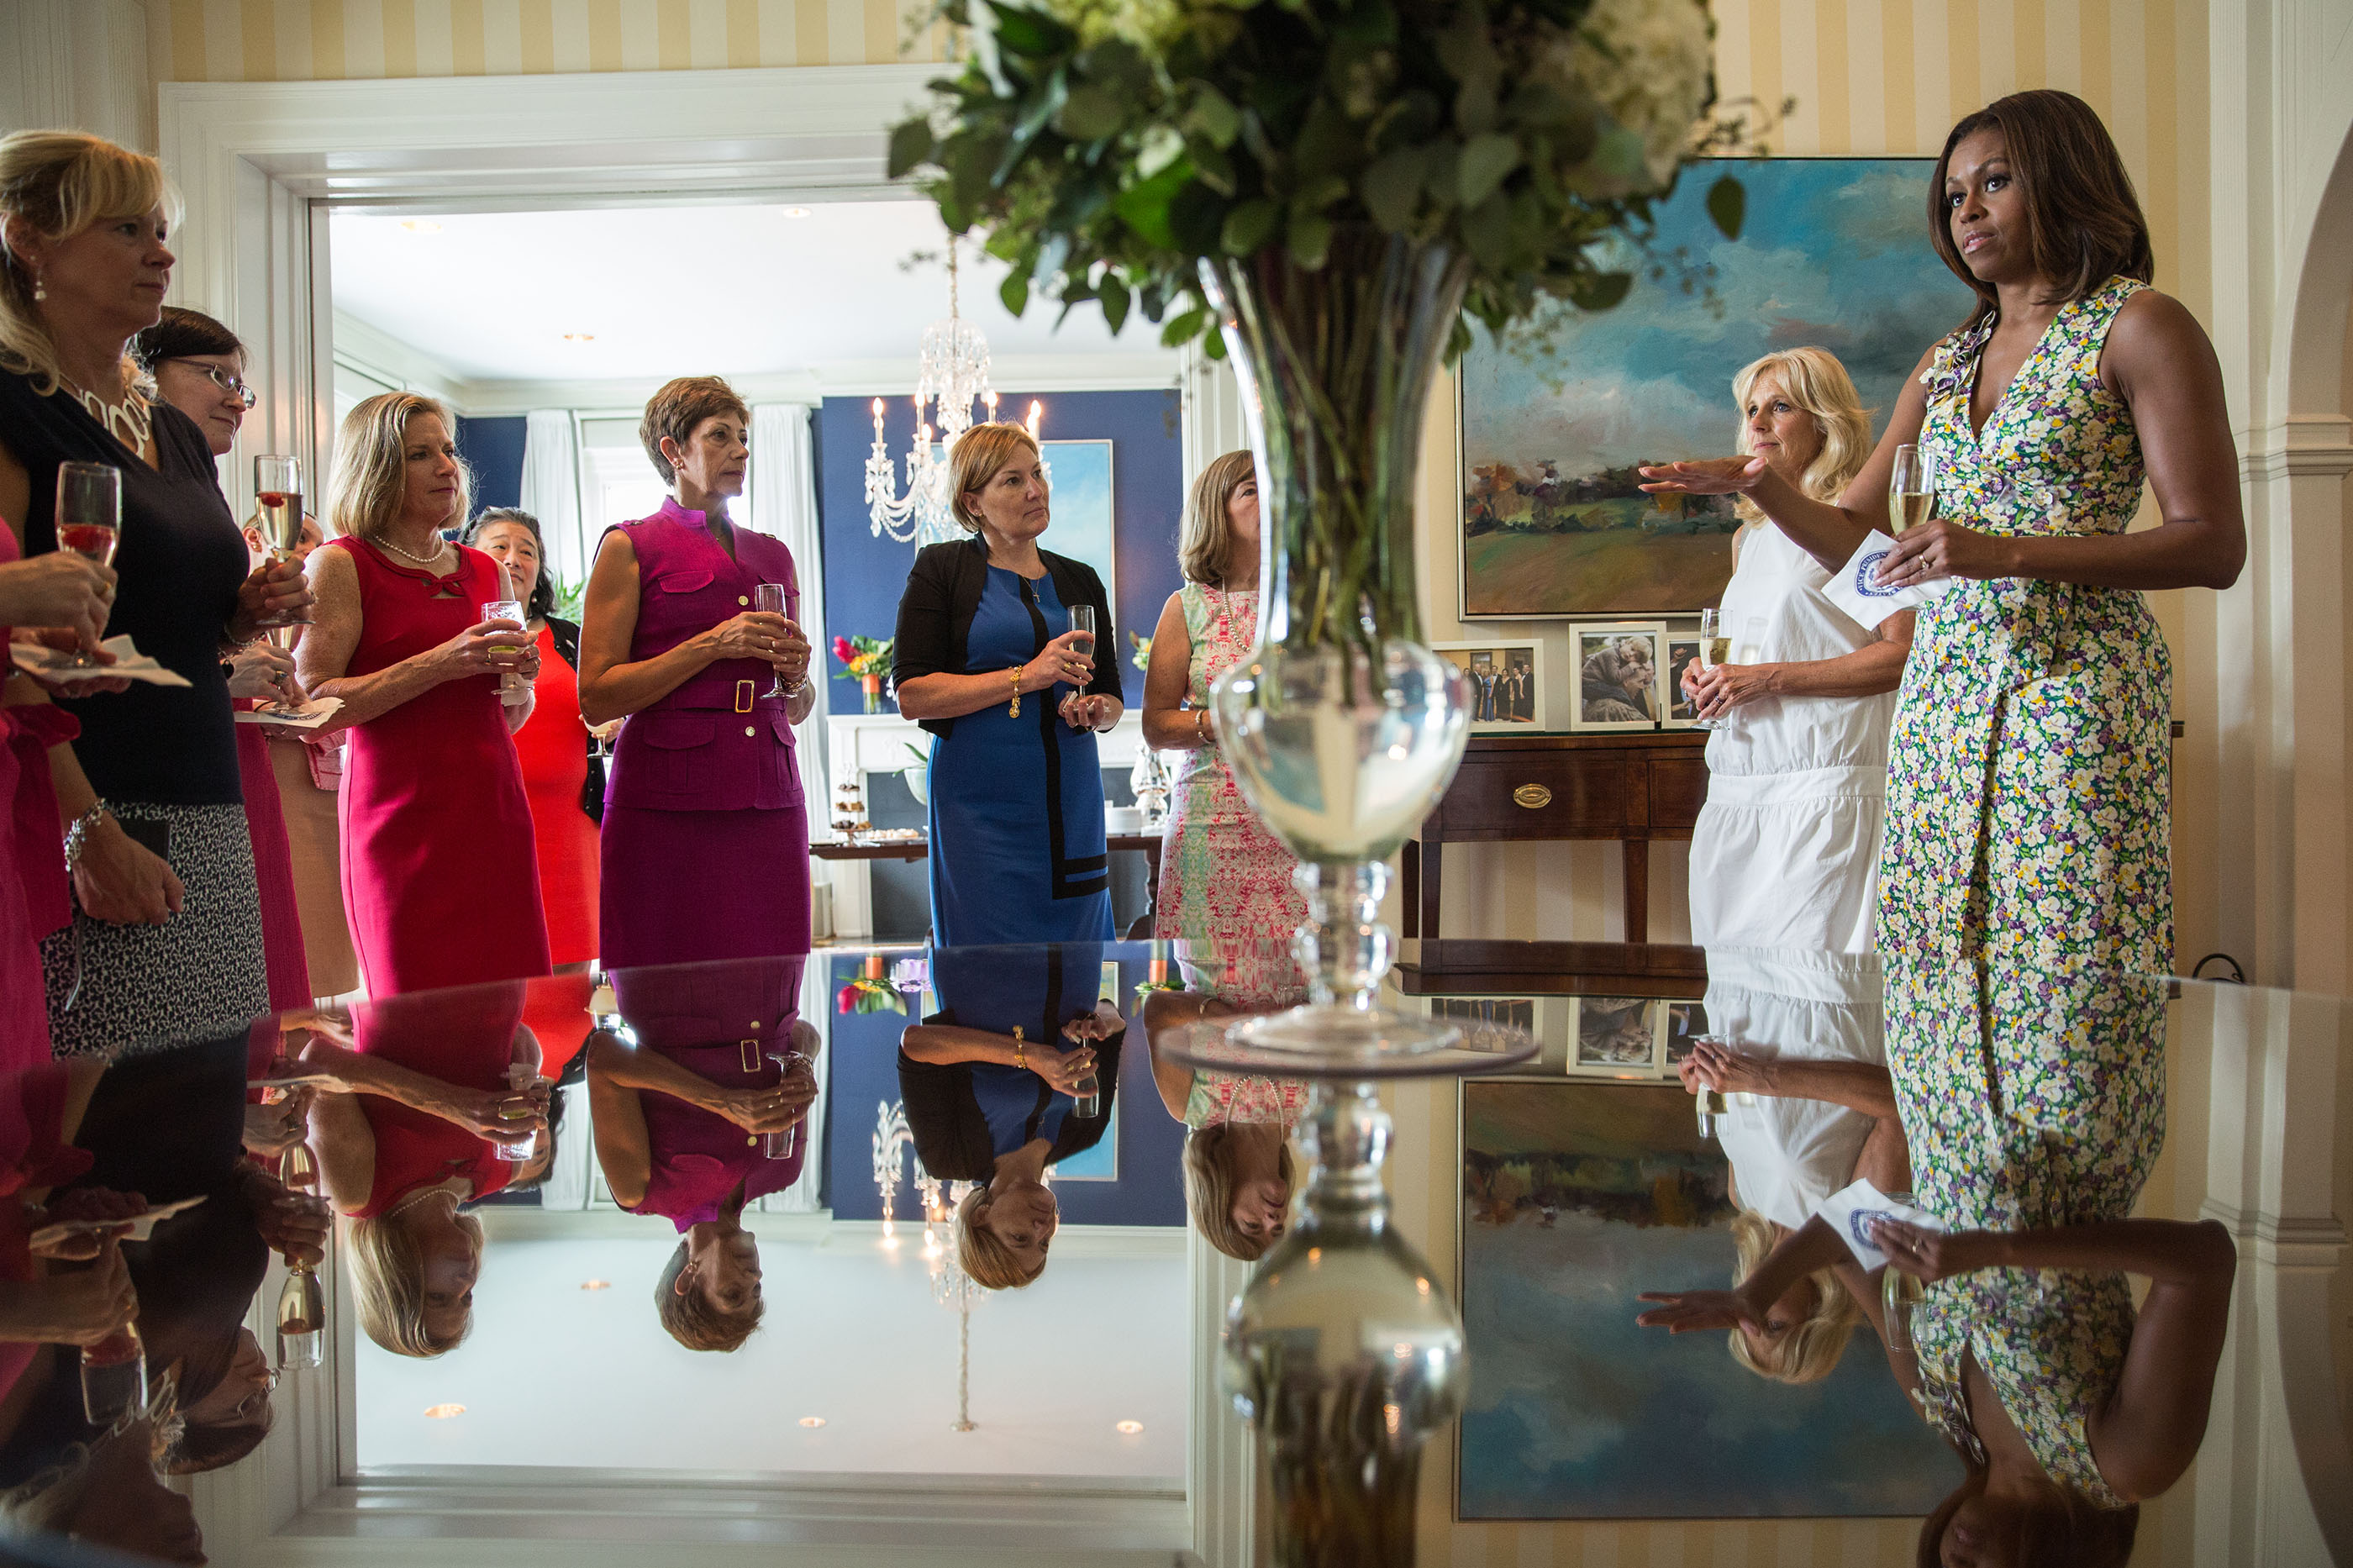 The First Lady and Dr. Biden host tea for the military spouses at the Vice President's Residence at the Naval Observatory in Washington, D.C., June 25, 2014. (Official White House Photo by Chuck Kennedy)